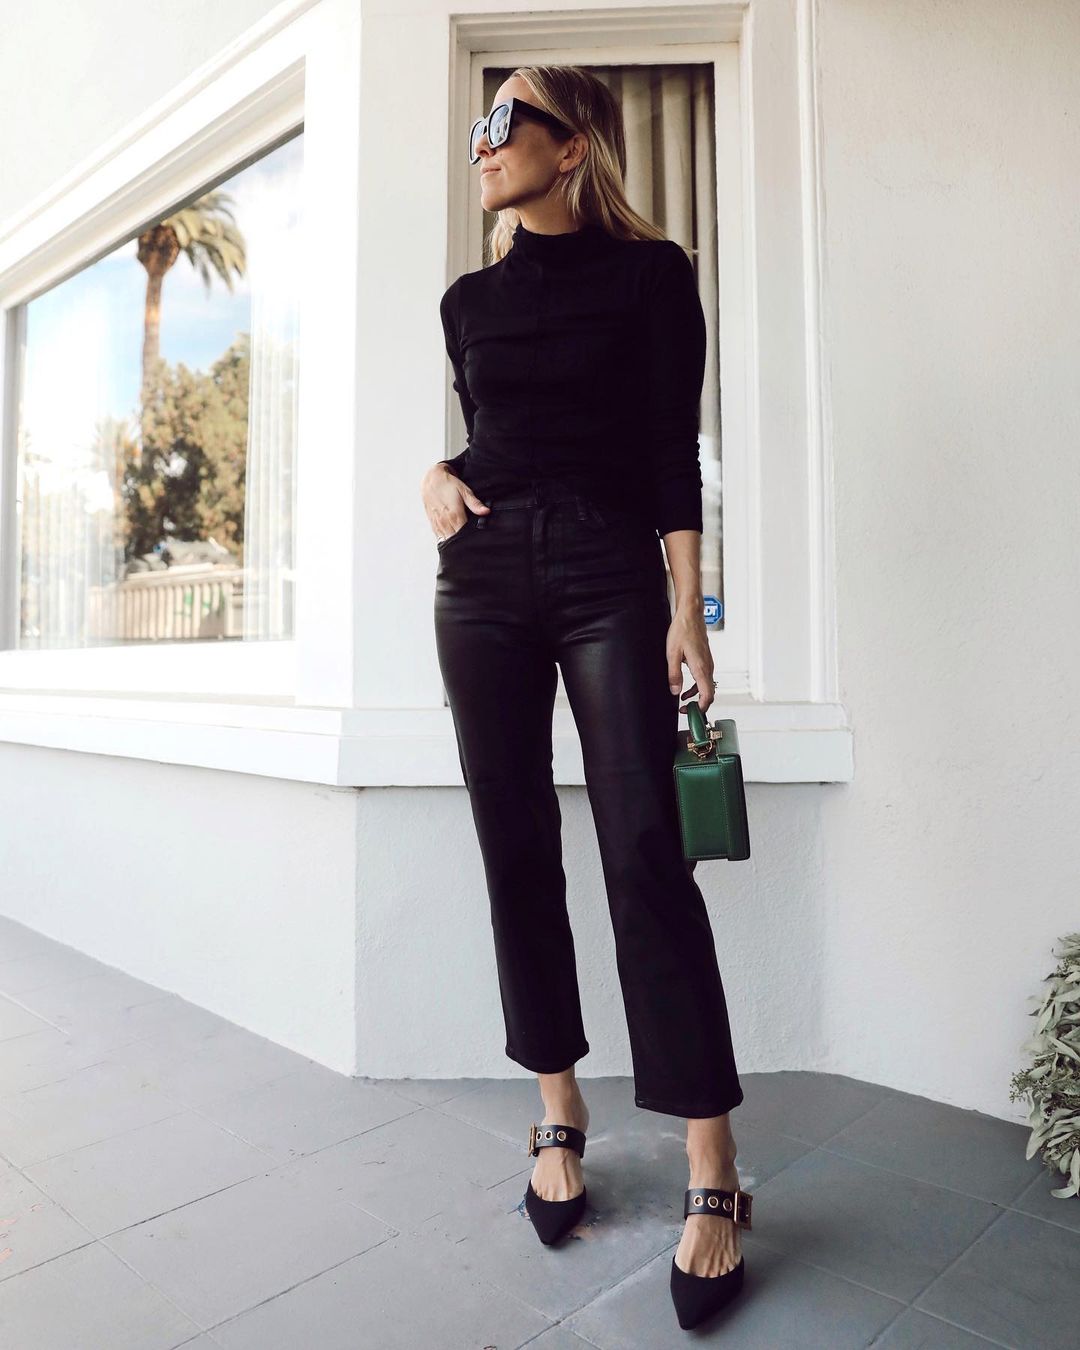 This All-Black Look Can Take You From Day to Night